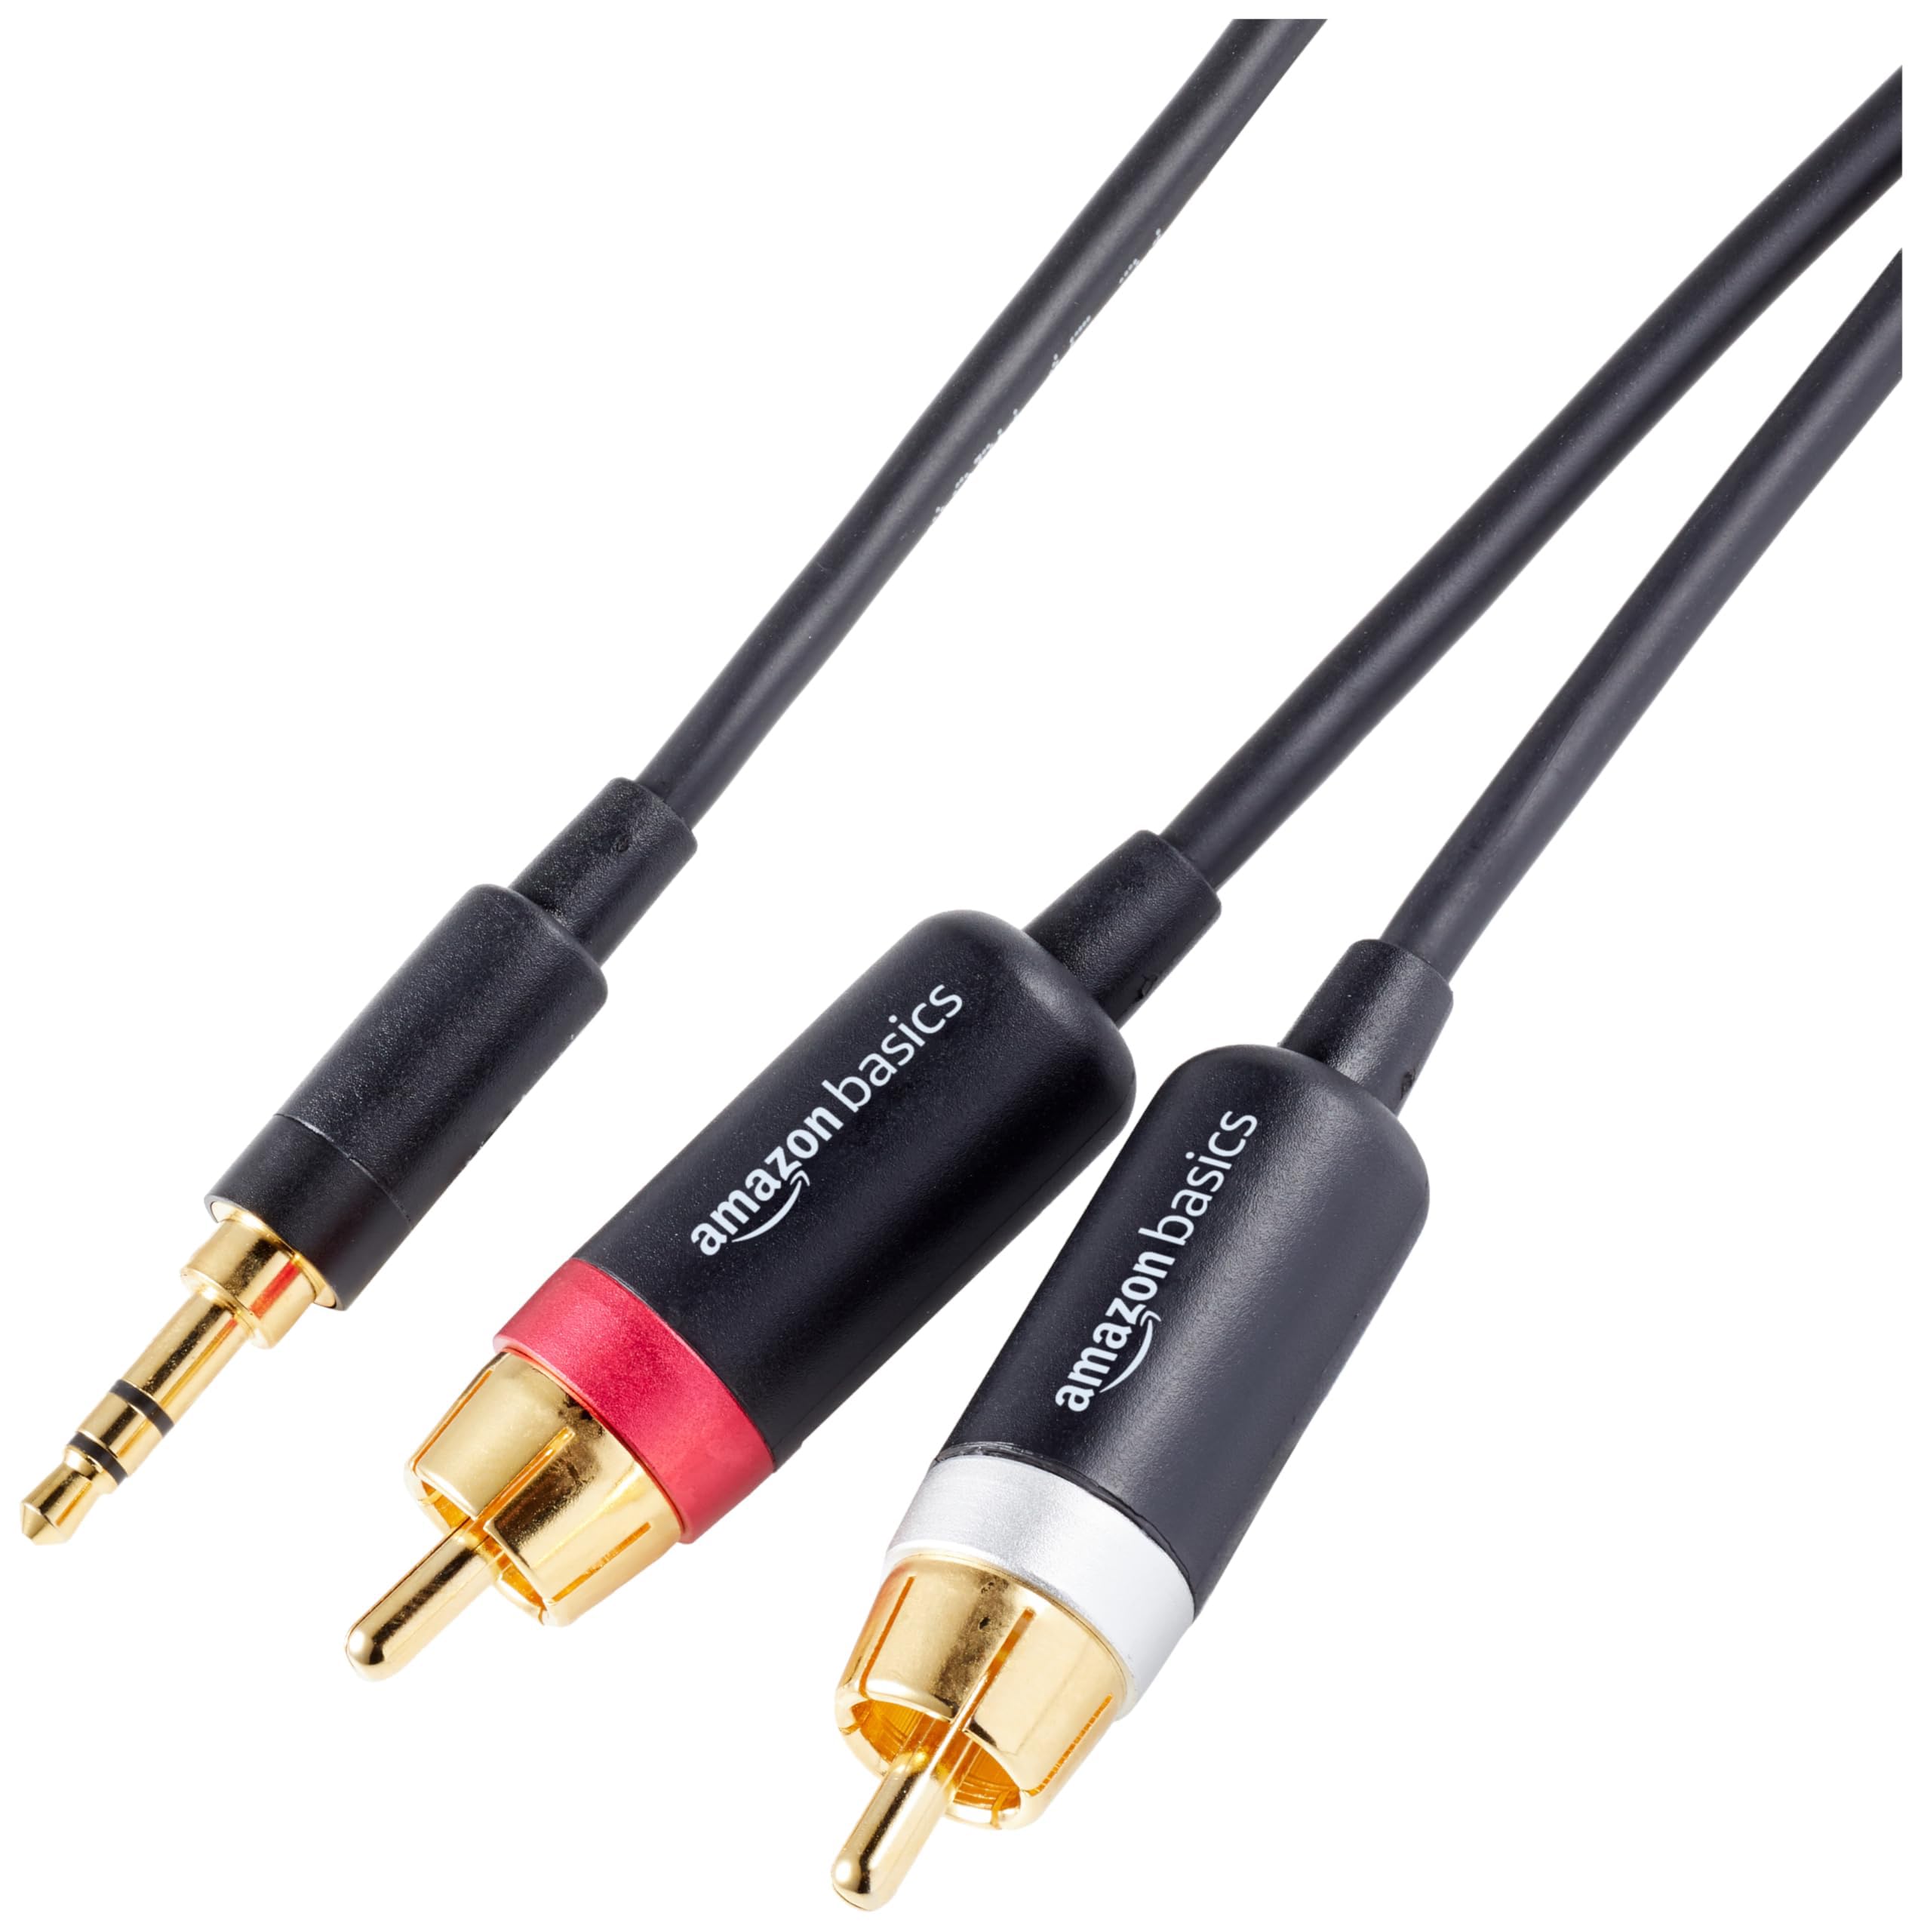 Compatible with various adapters for other connection types
Audio and video transmission in a single cable